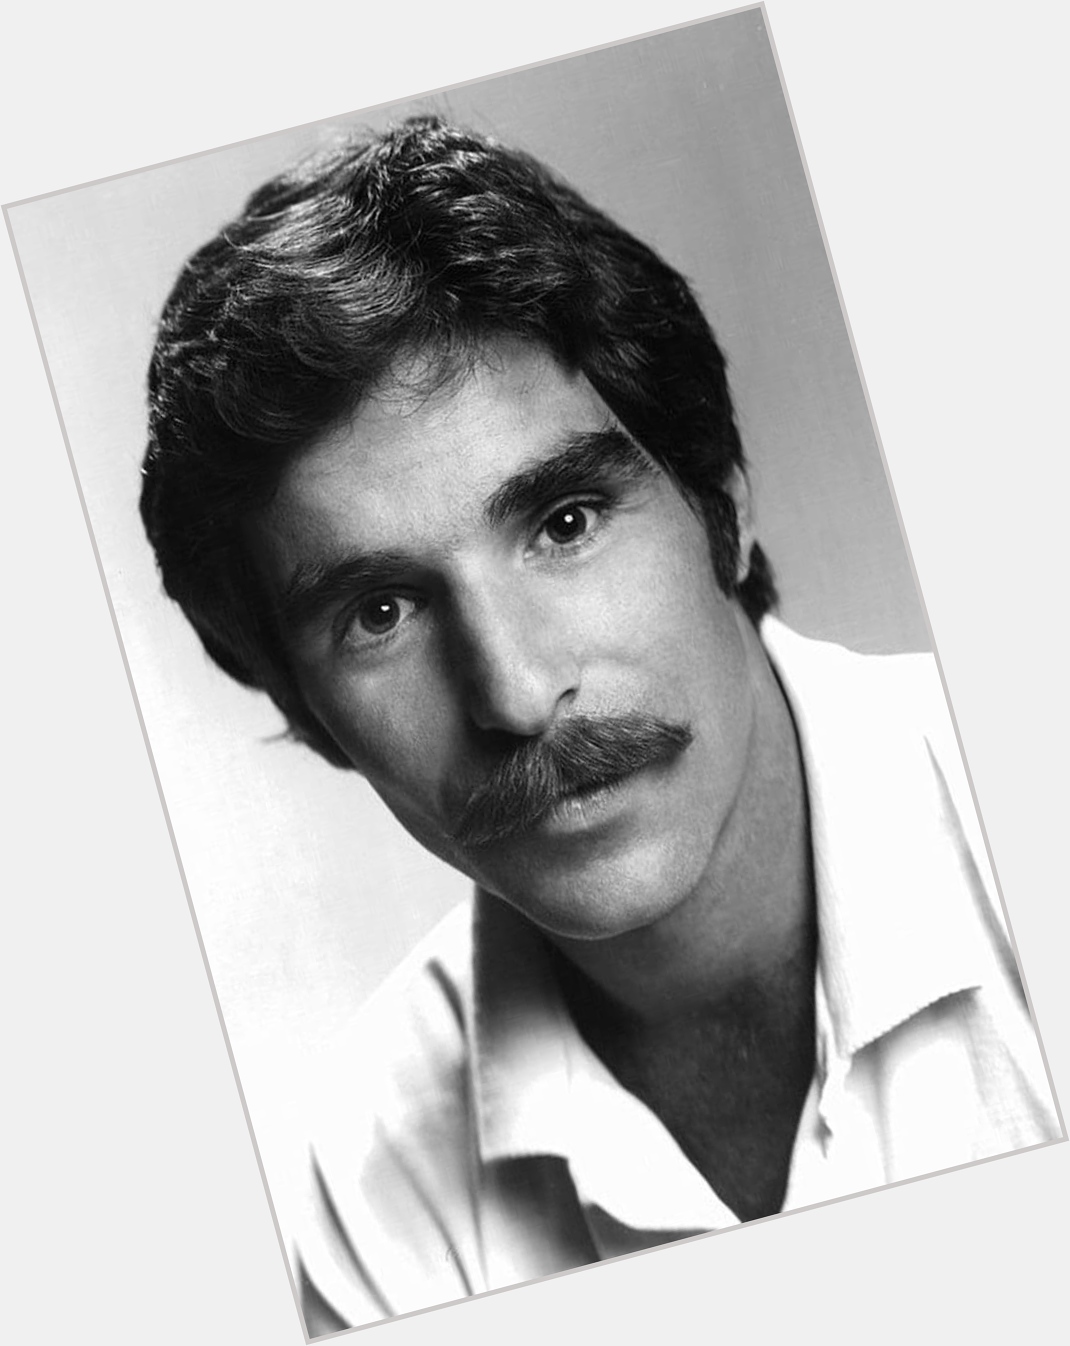  in 1947: Harry Reems (Herbert John Streicher) was born in The Bronx, NY. Happy Birthday, Dr. Young! 